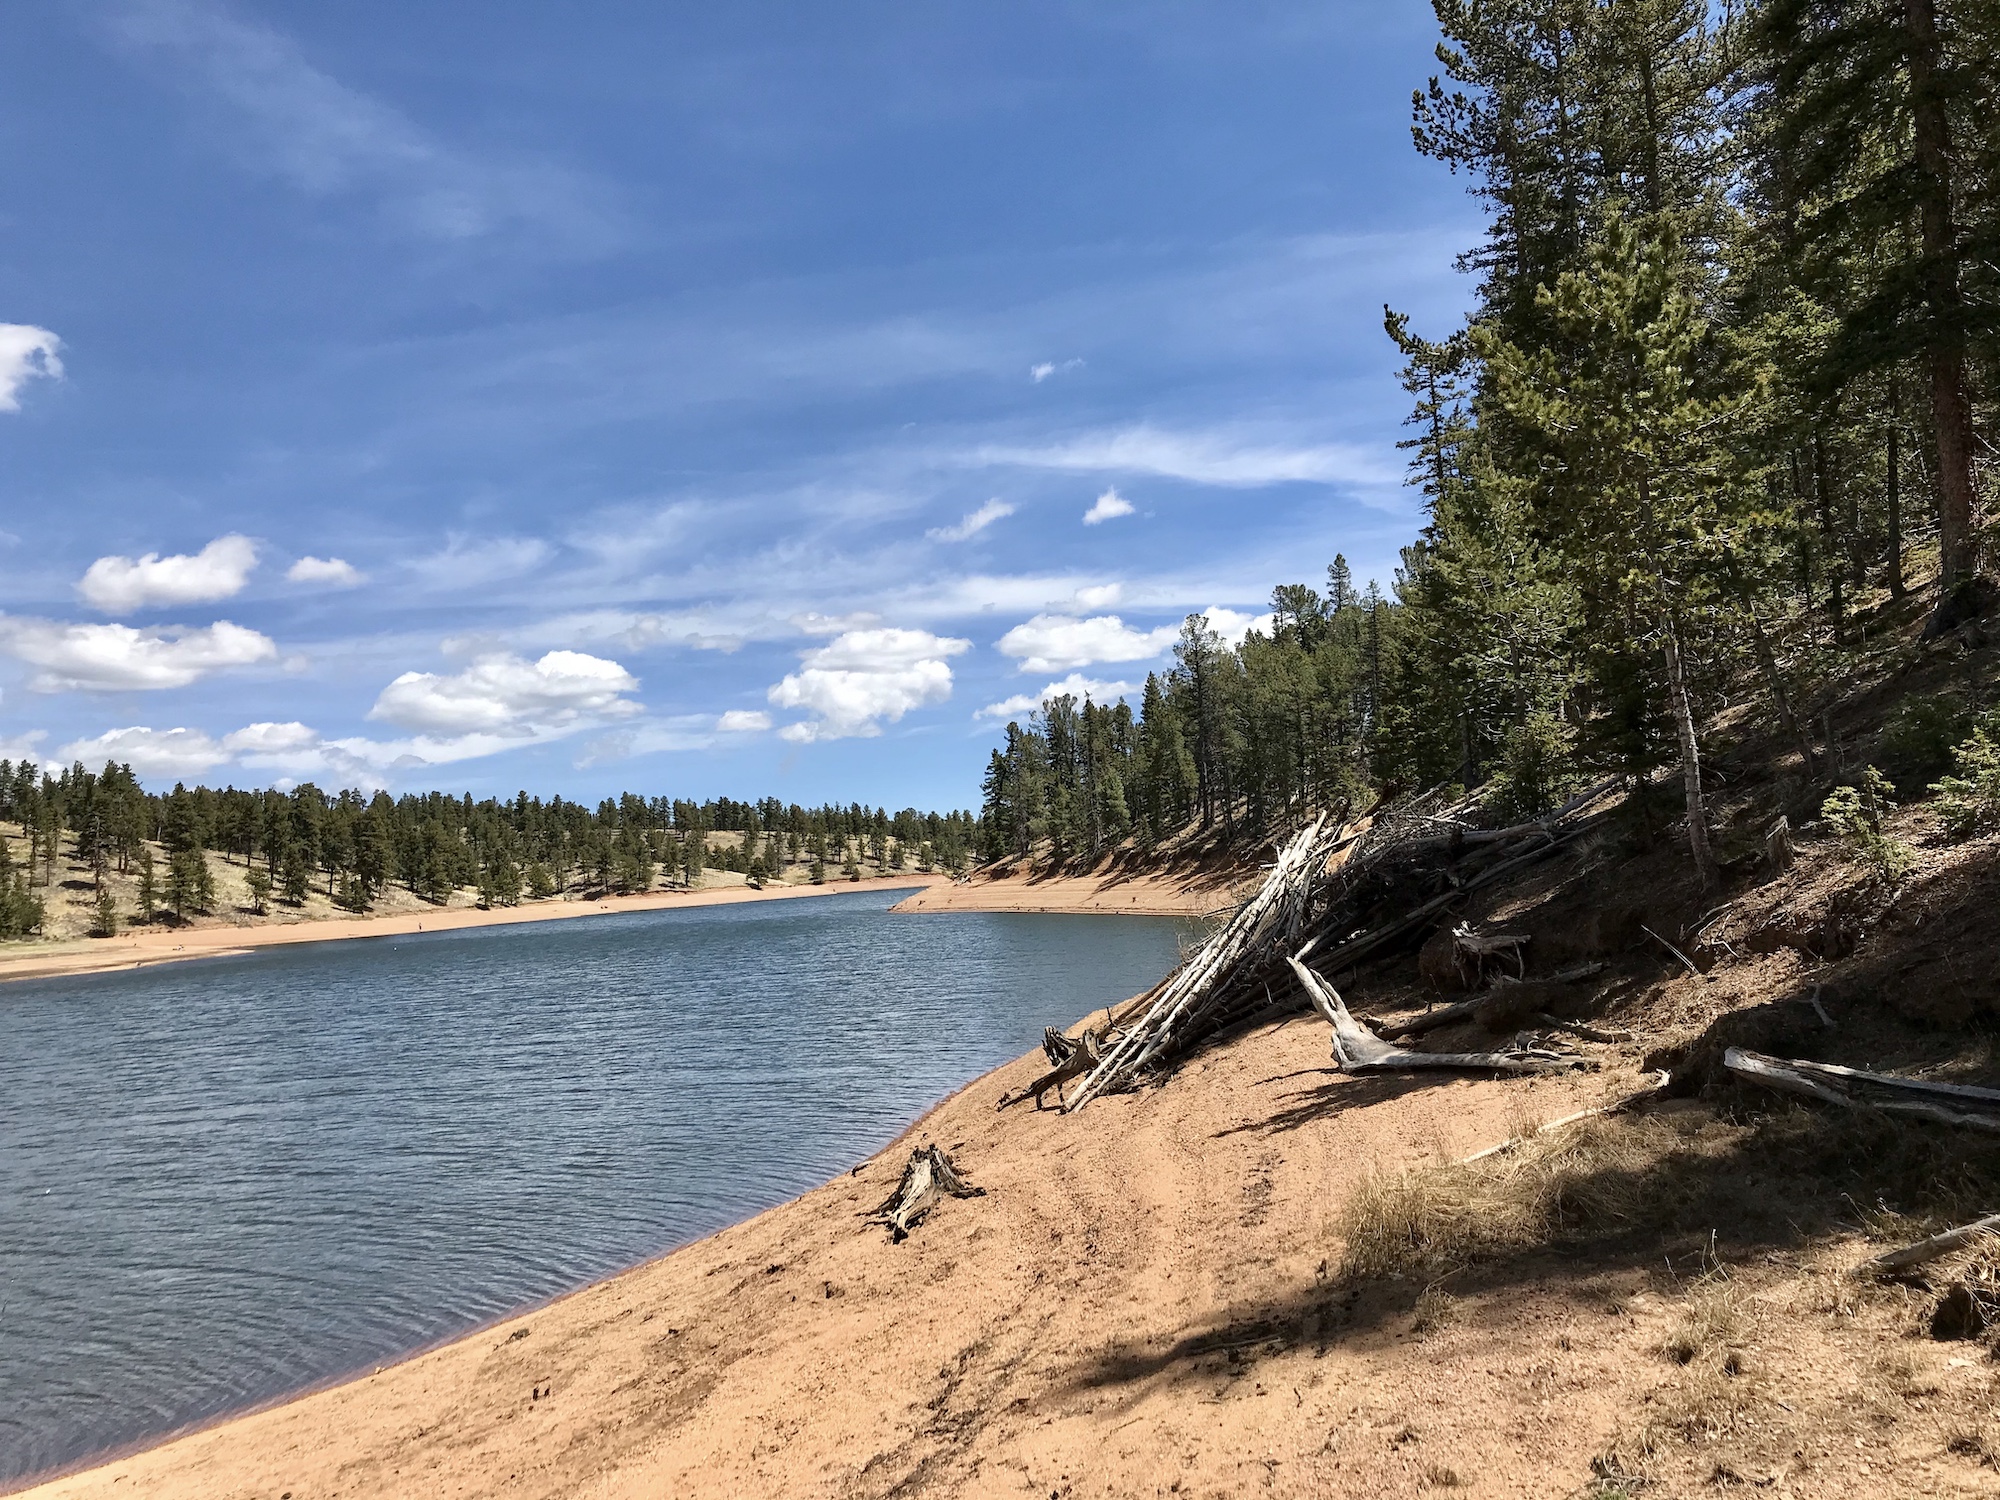 North Catamount Reservoir near Woodland Park, Colorado, on a beautiful May day in 2020.